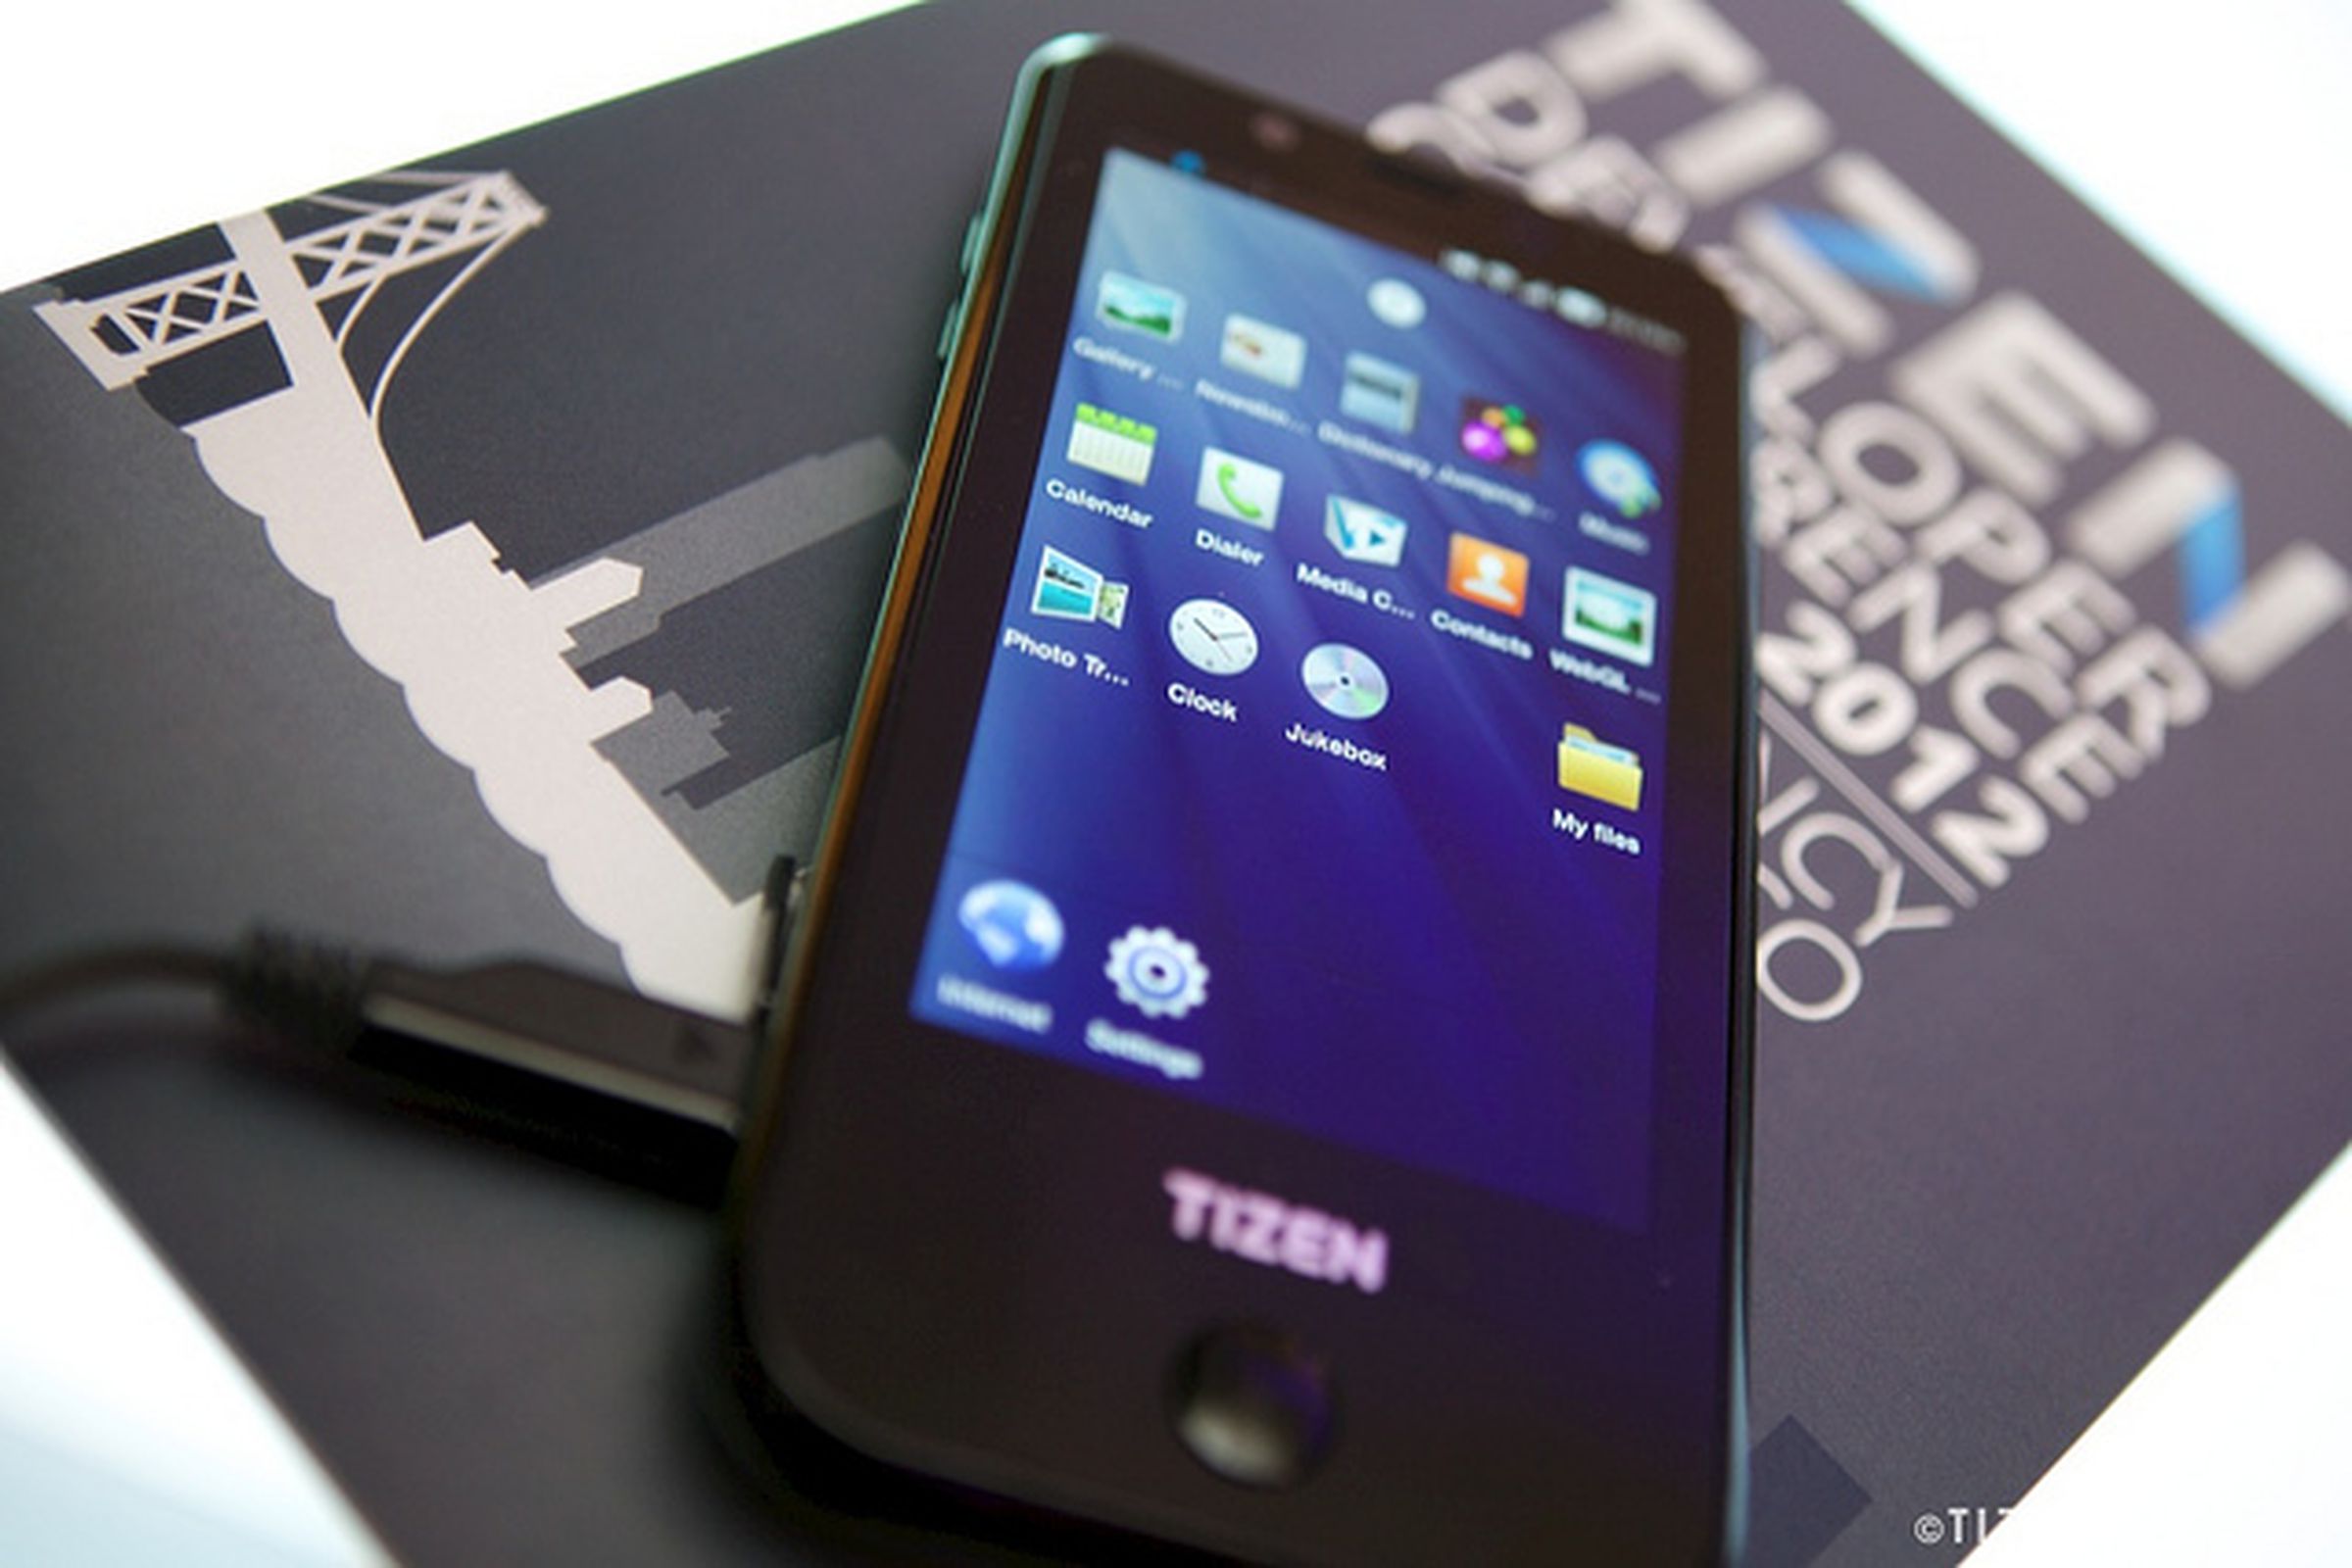 Purported Samsung-made Tizen reference hardware (TIZEN TALK)